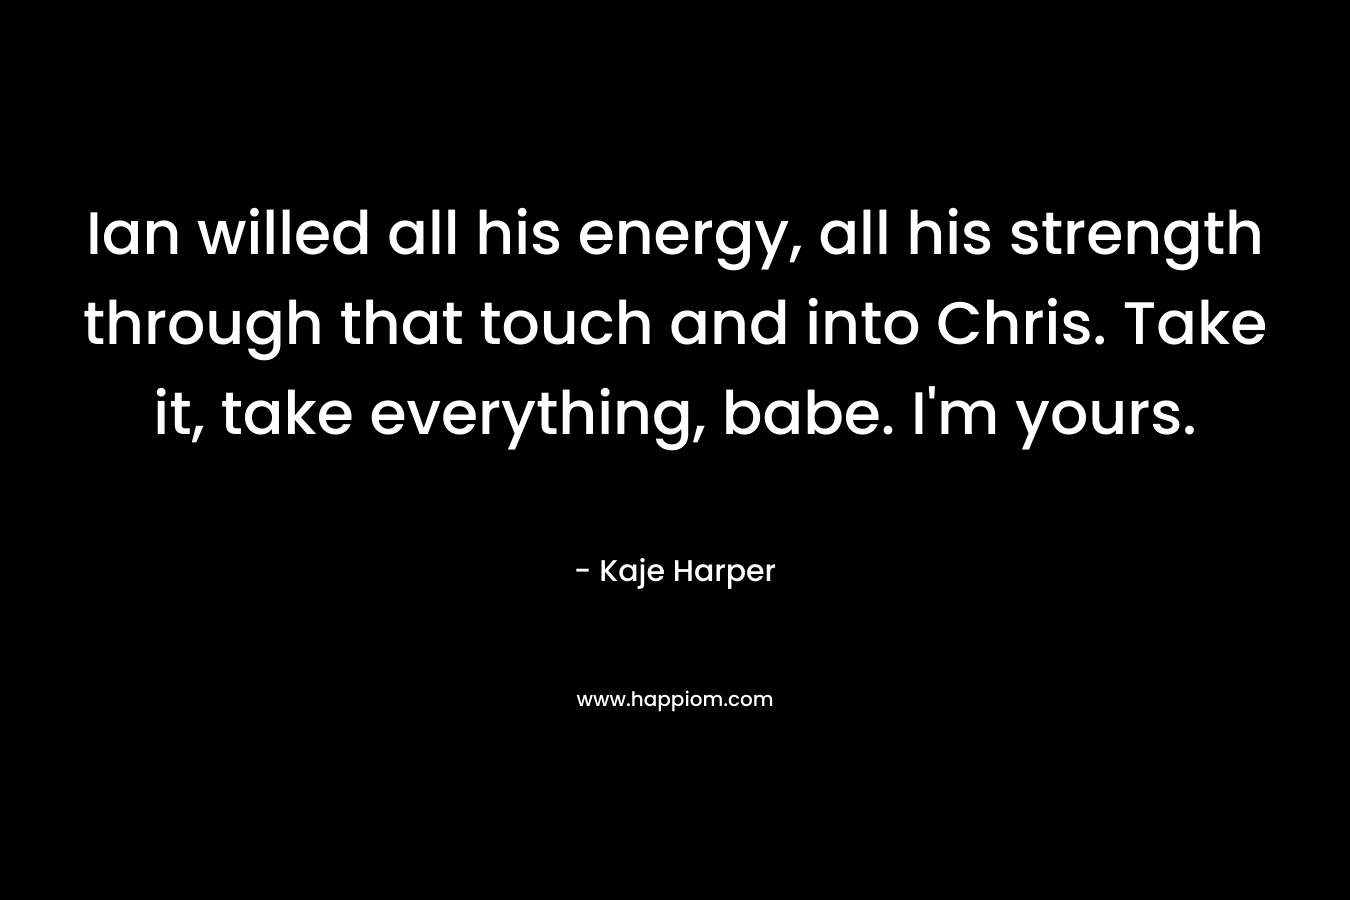 Ian willed all his energy, all his strength through that touch and into Chris. Take it, take everything, babe. I’m yours. – Kaje Harper